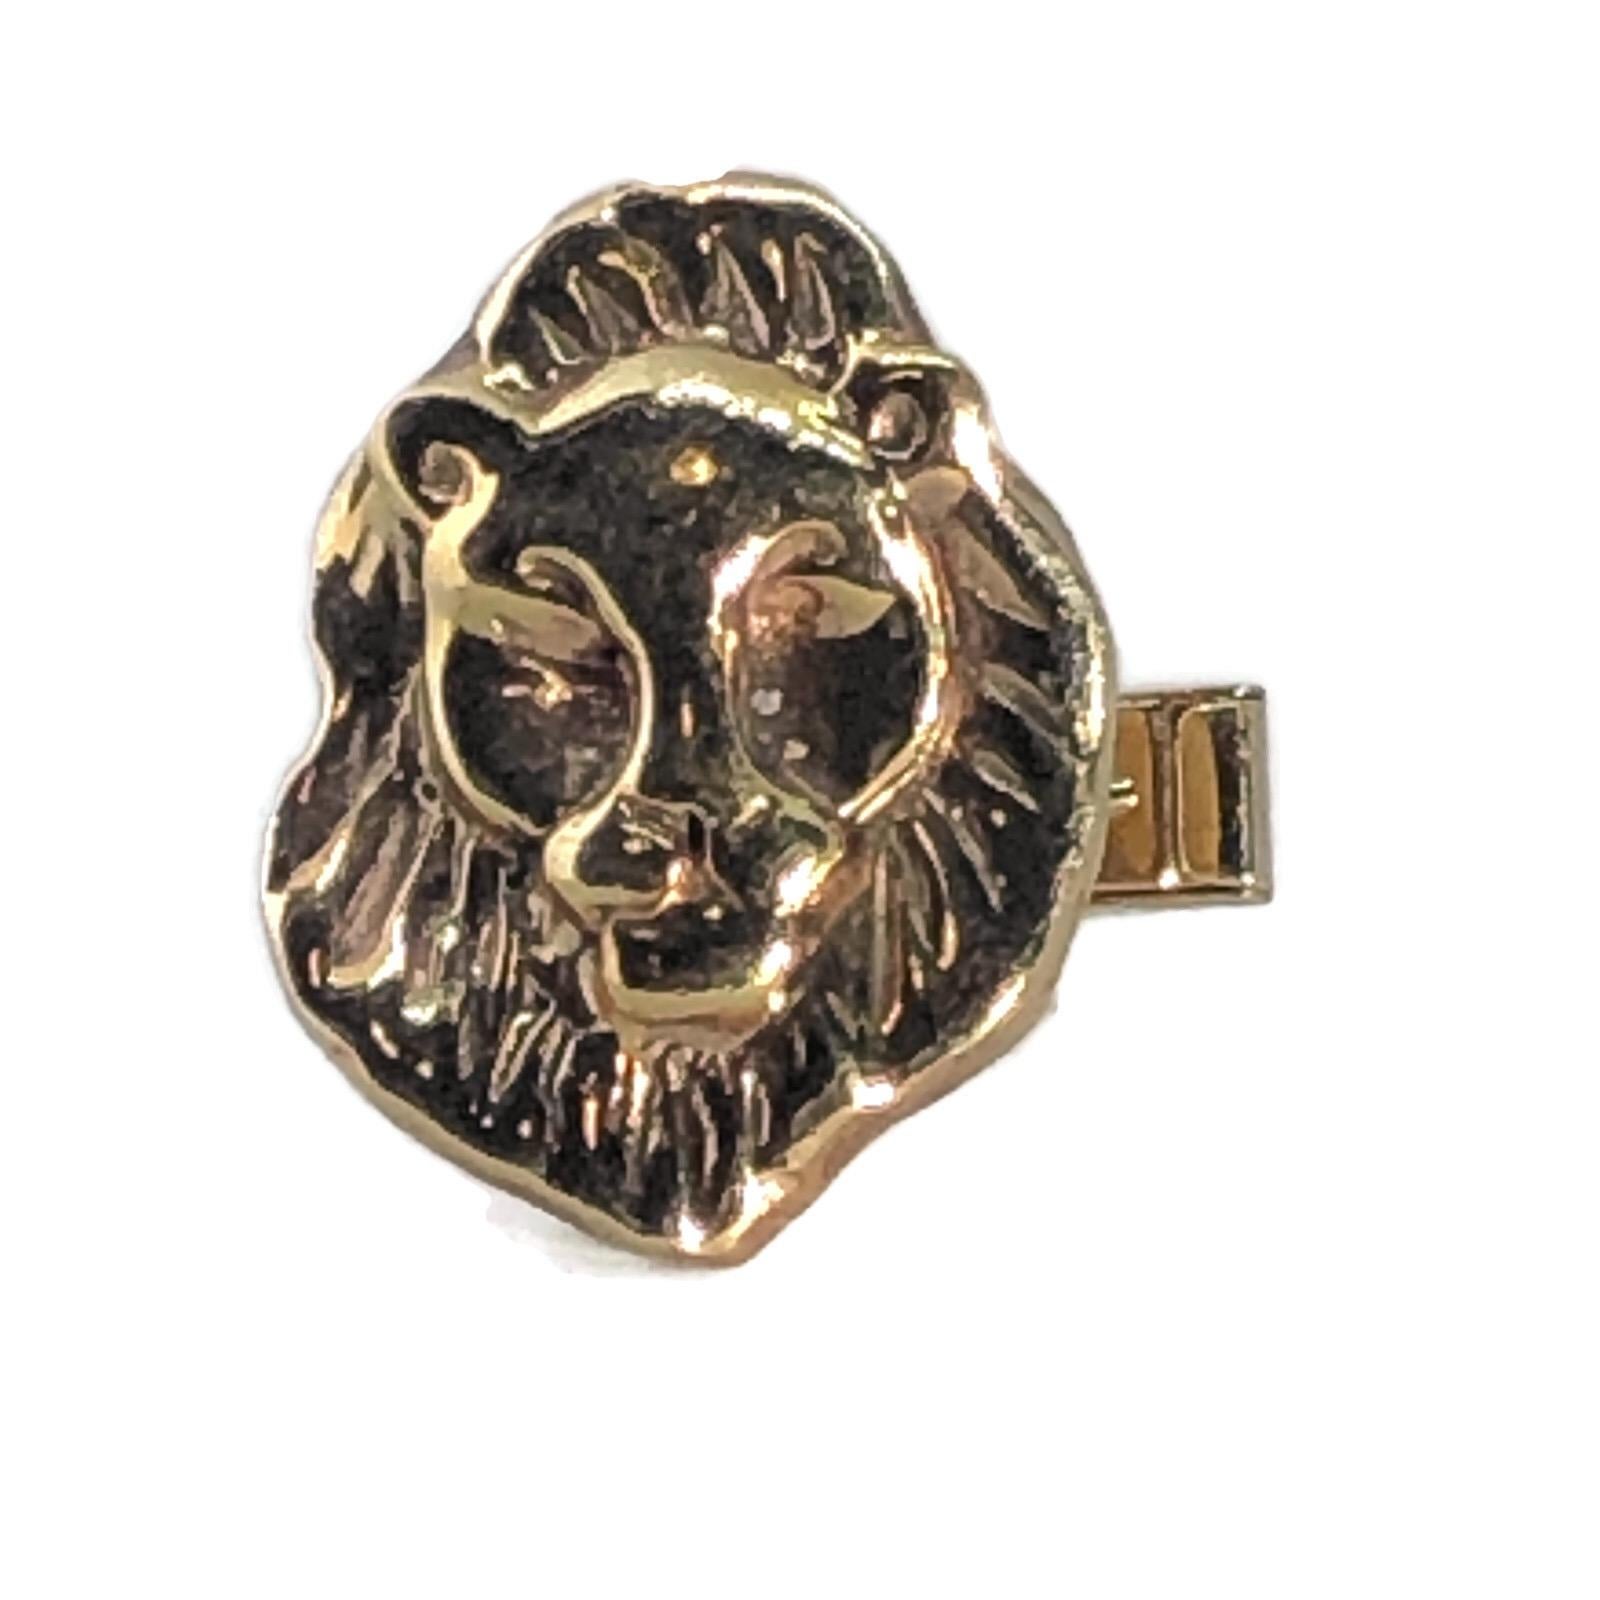 Vintage Unisex Cufflinks in Lion and Lioness Design Made in 14 Karat Yellow Gold In Excellent Condition For Sale In New York, NY